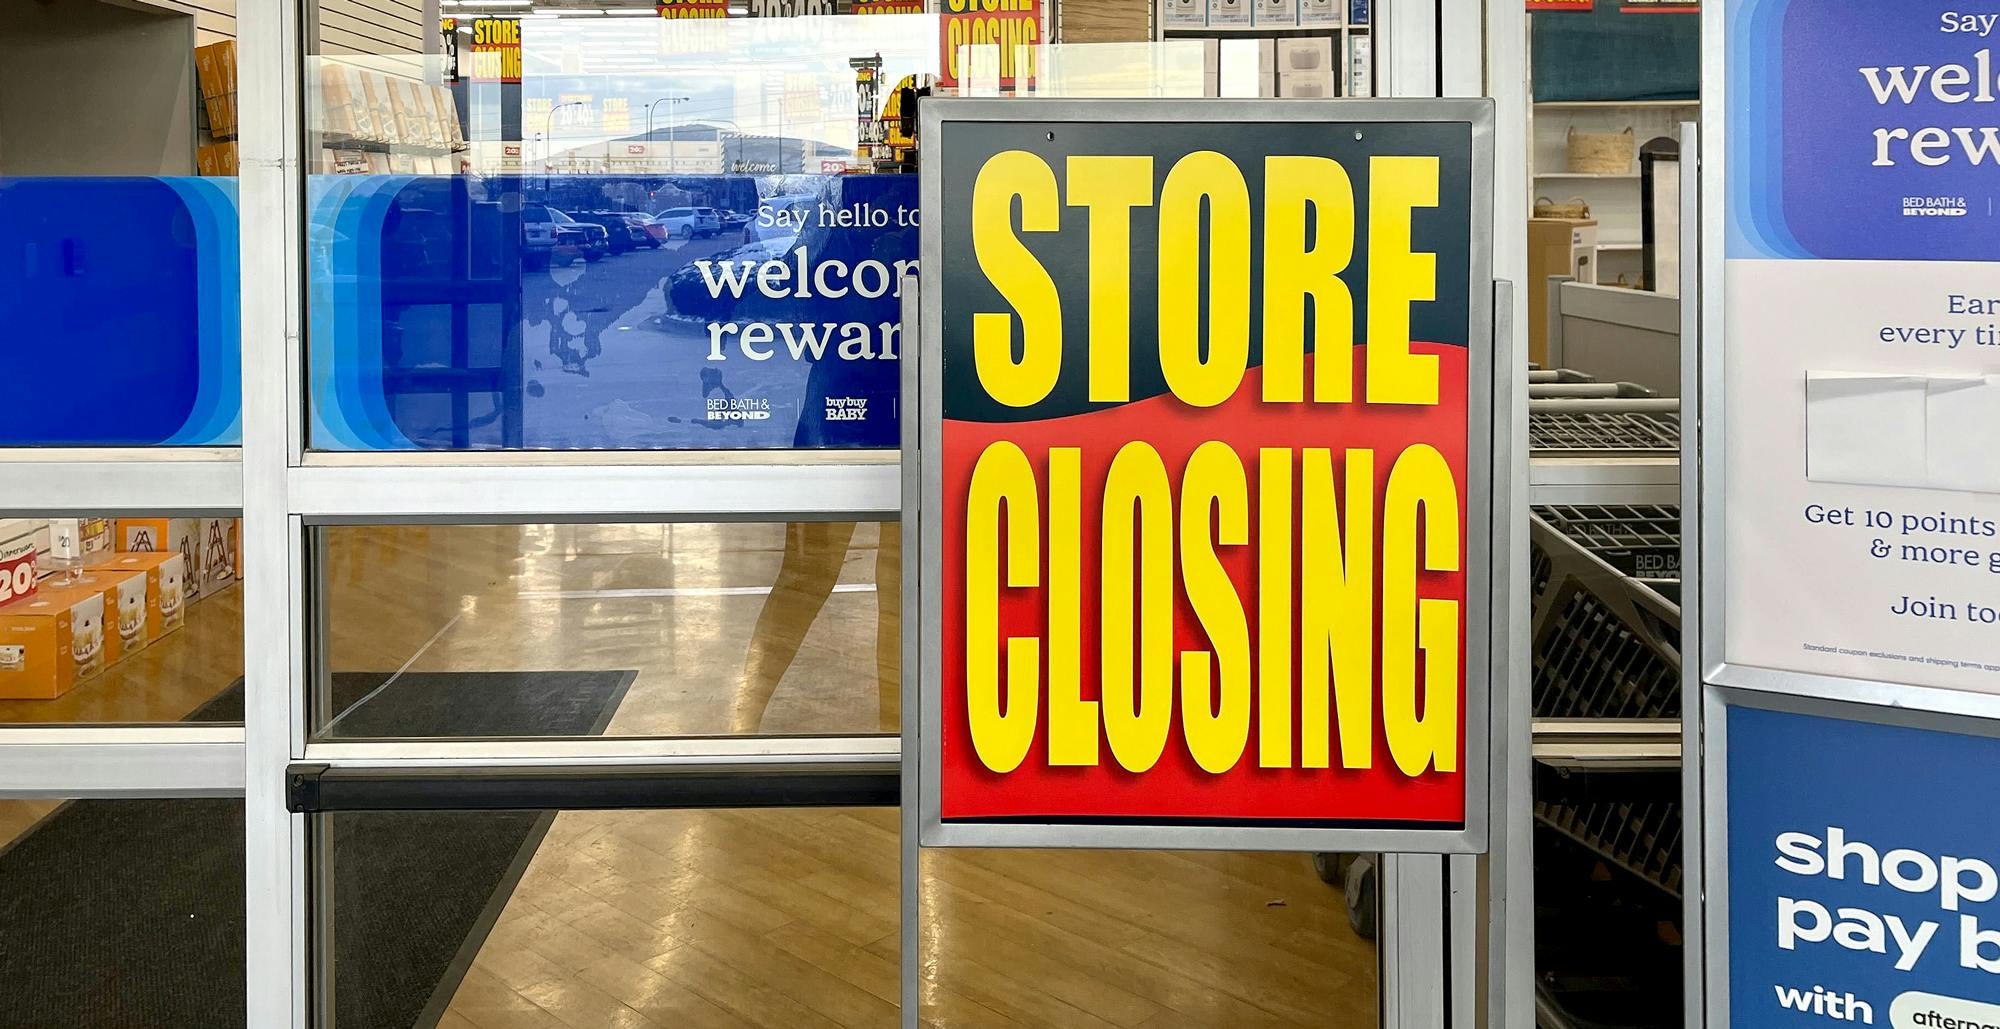 Bed Bath Beyond Stores Closing Sliding Doors Signage Feature 1677619741 1677619741 